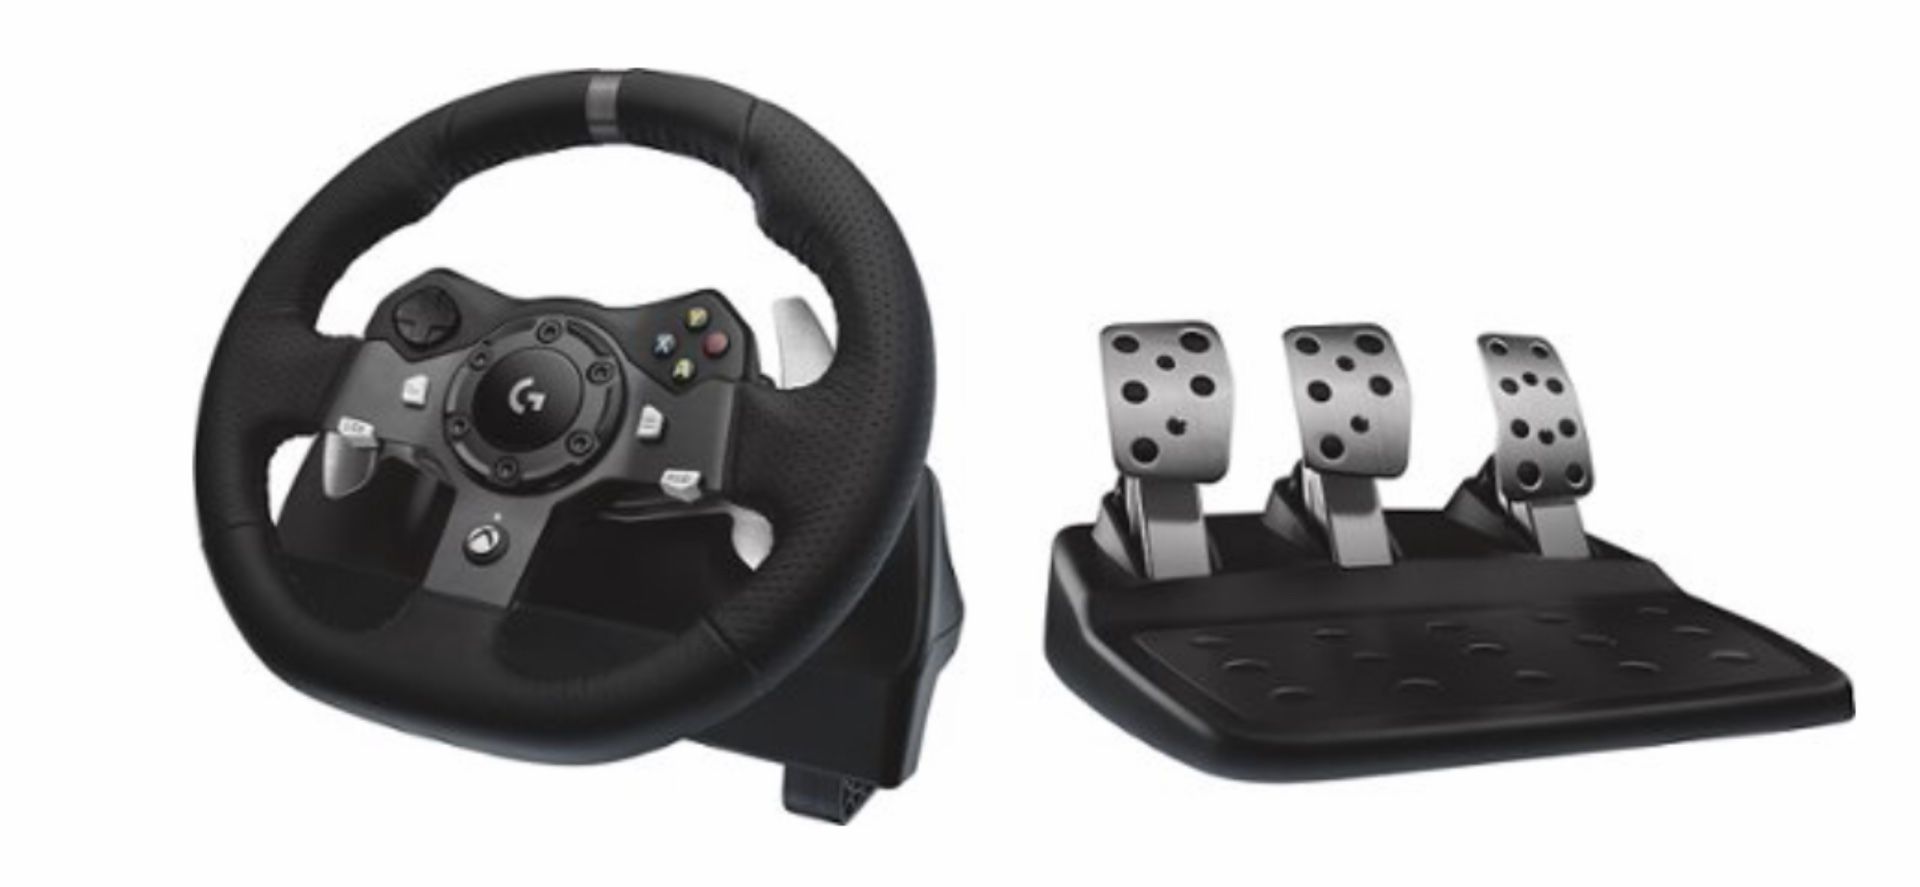 Logitech - G920 Driving Force Racing Wheel for Xbox One and Windows - Black